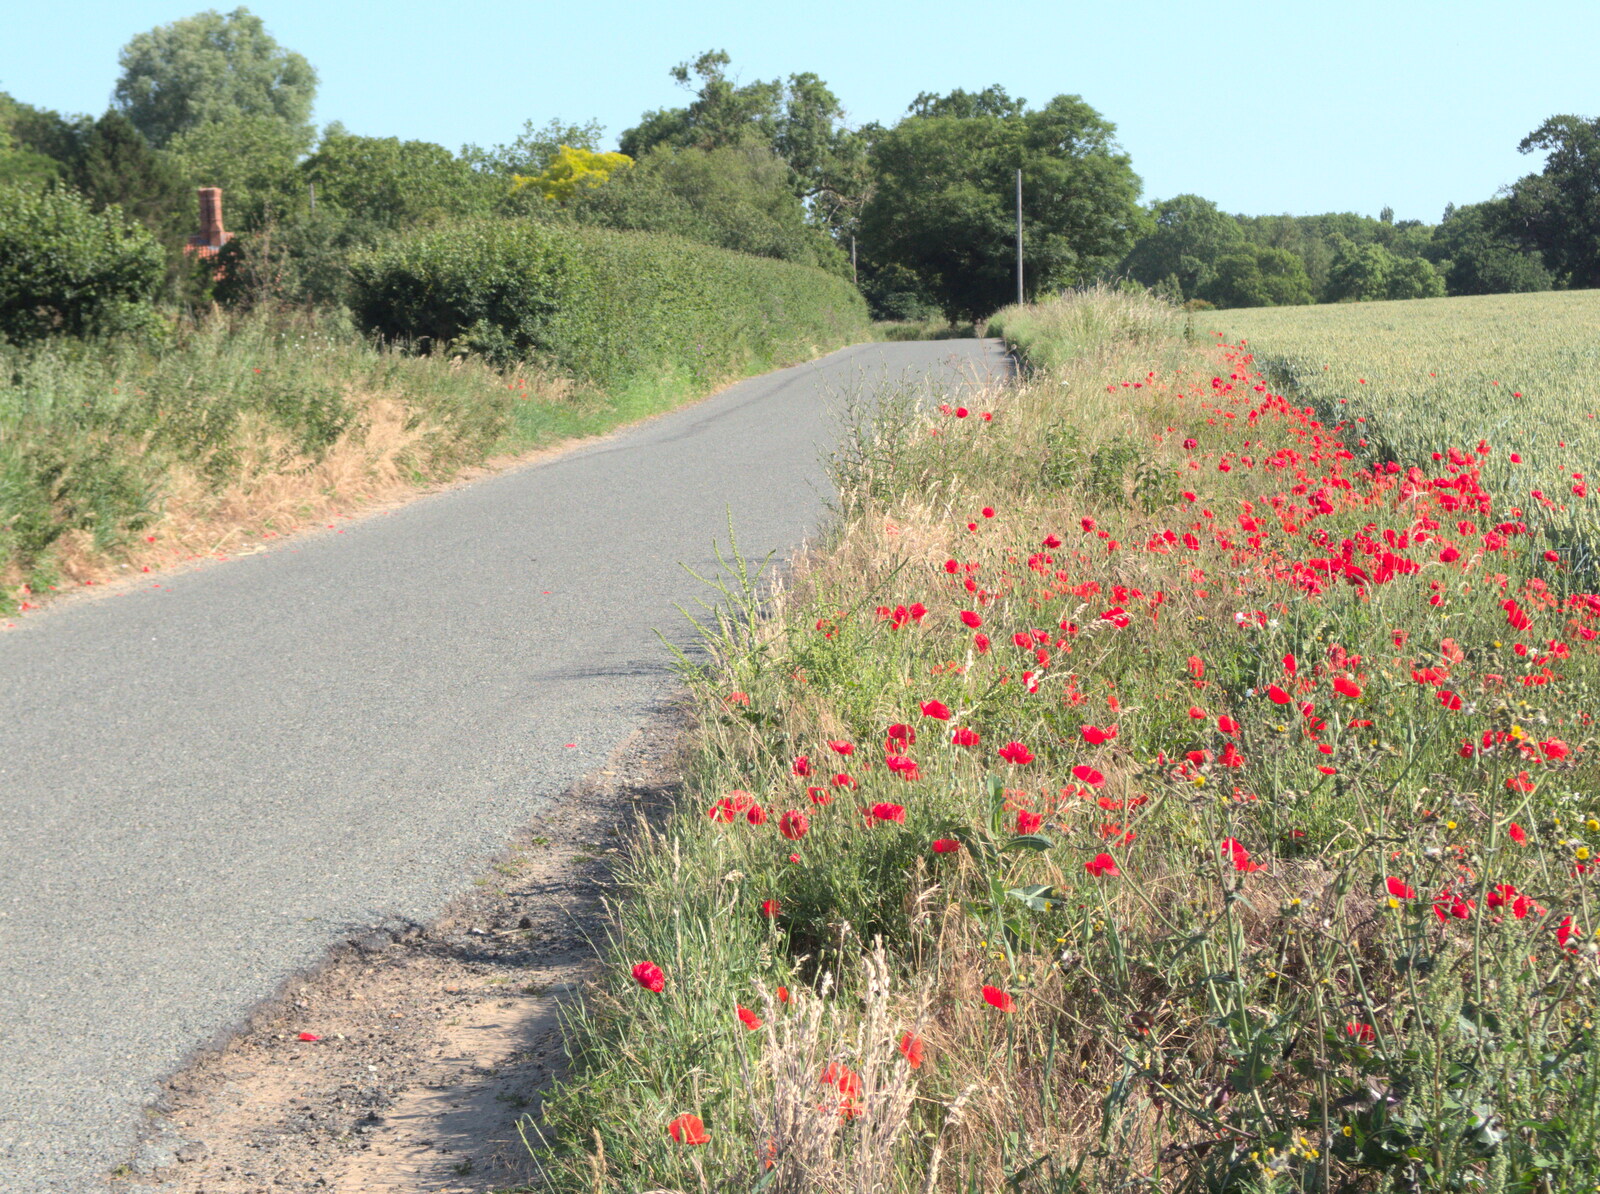 Poppies in the verge outside Hoxne from Lockdown Bike Rides and an Anniversary Picnic, Mellis and Brome, Suffolk - 3rd July 2020